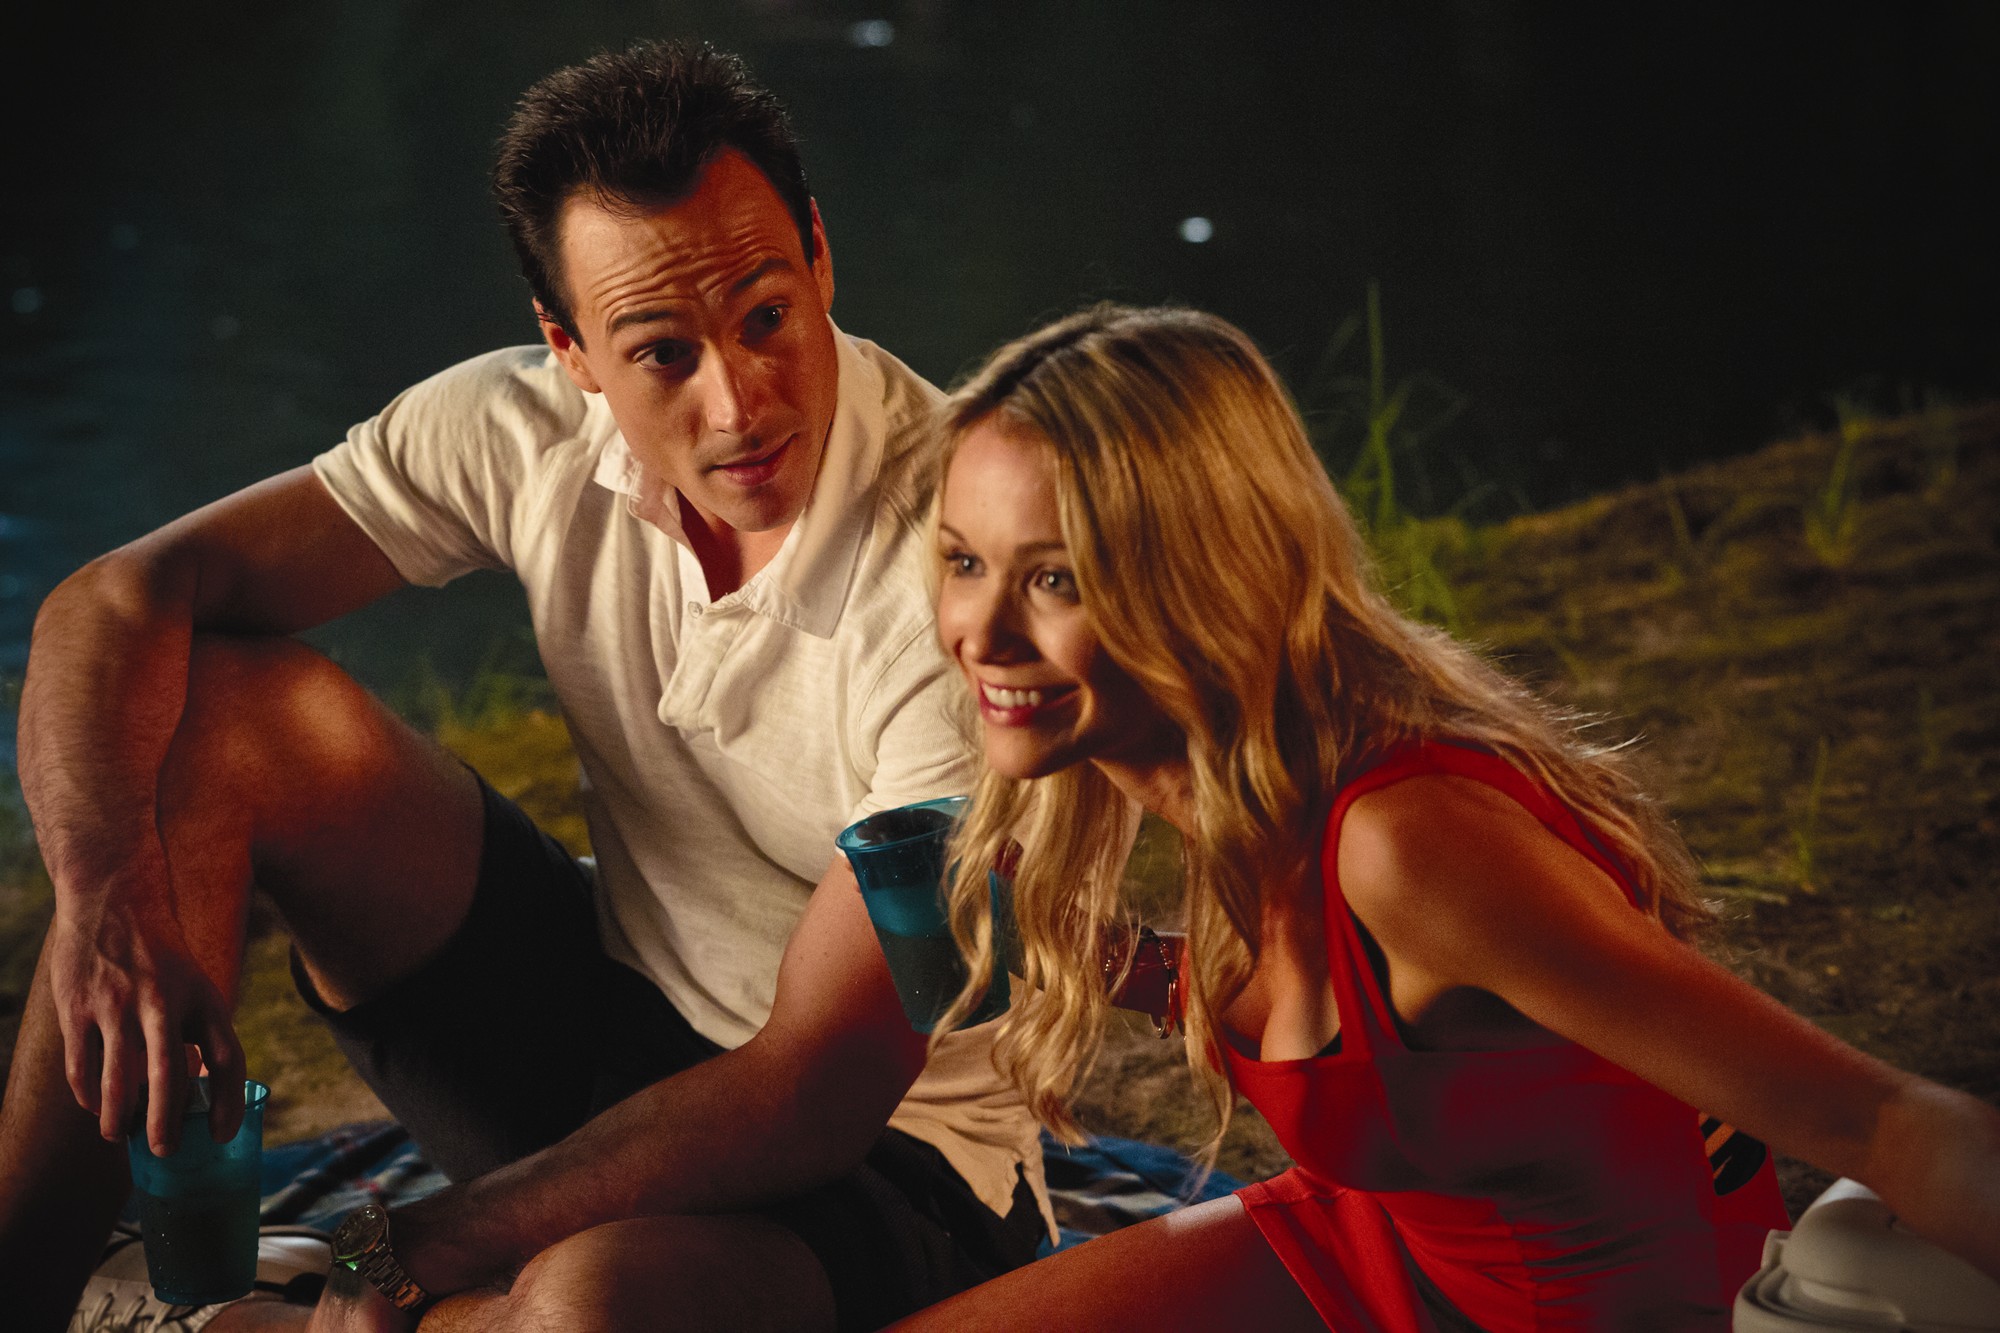 Chris Klein stars as Oz and Katrina Bowden stars as Mia in Universal Pictures' American Reunion (2012)